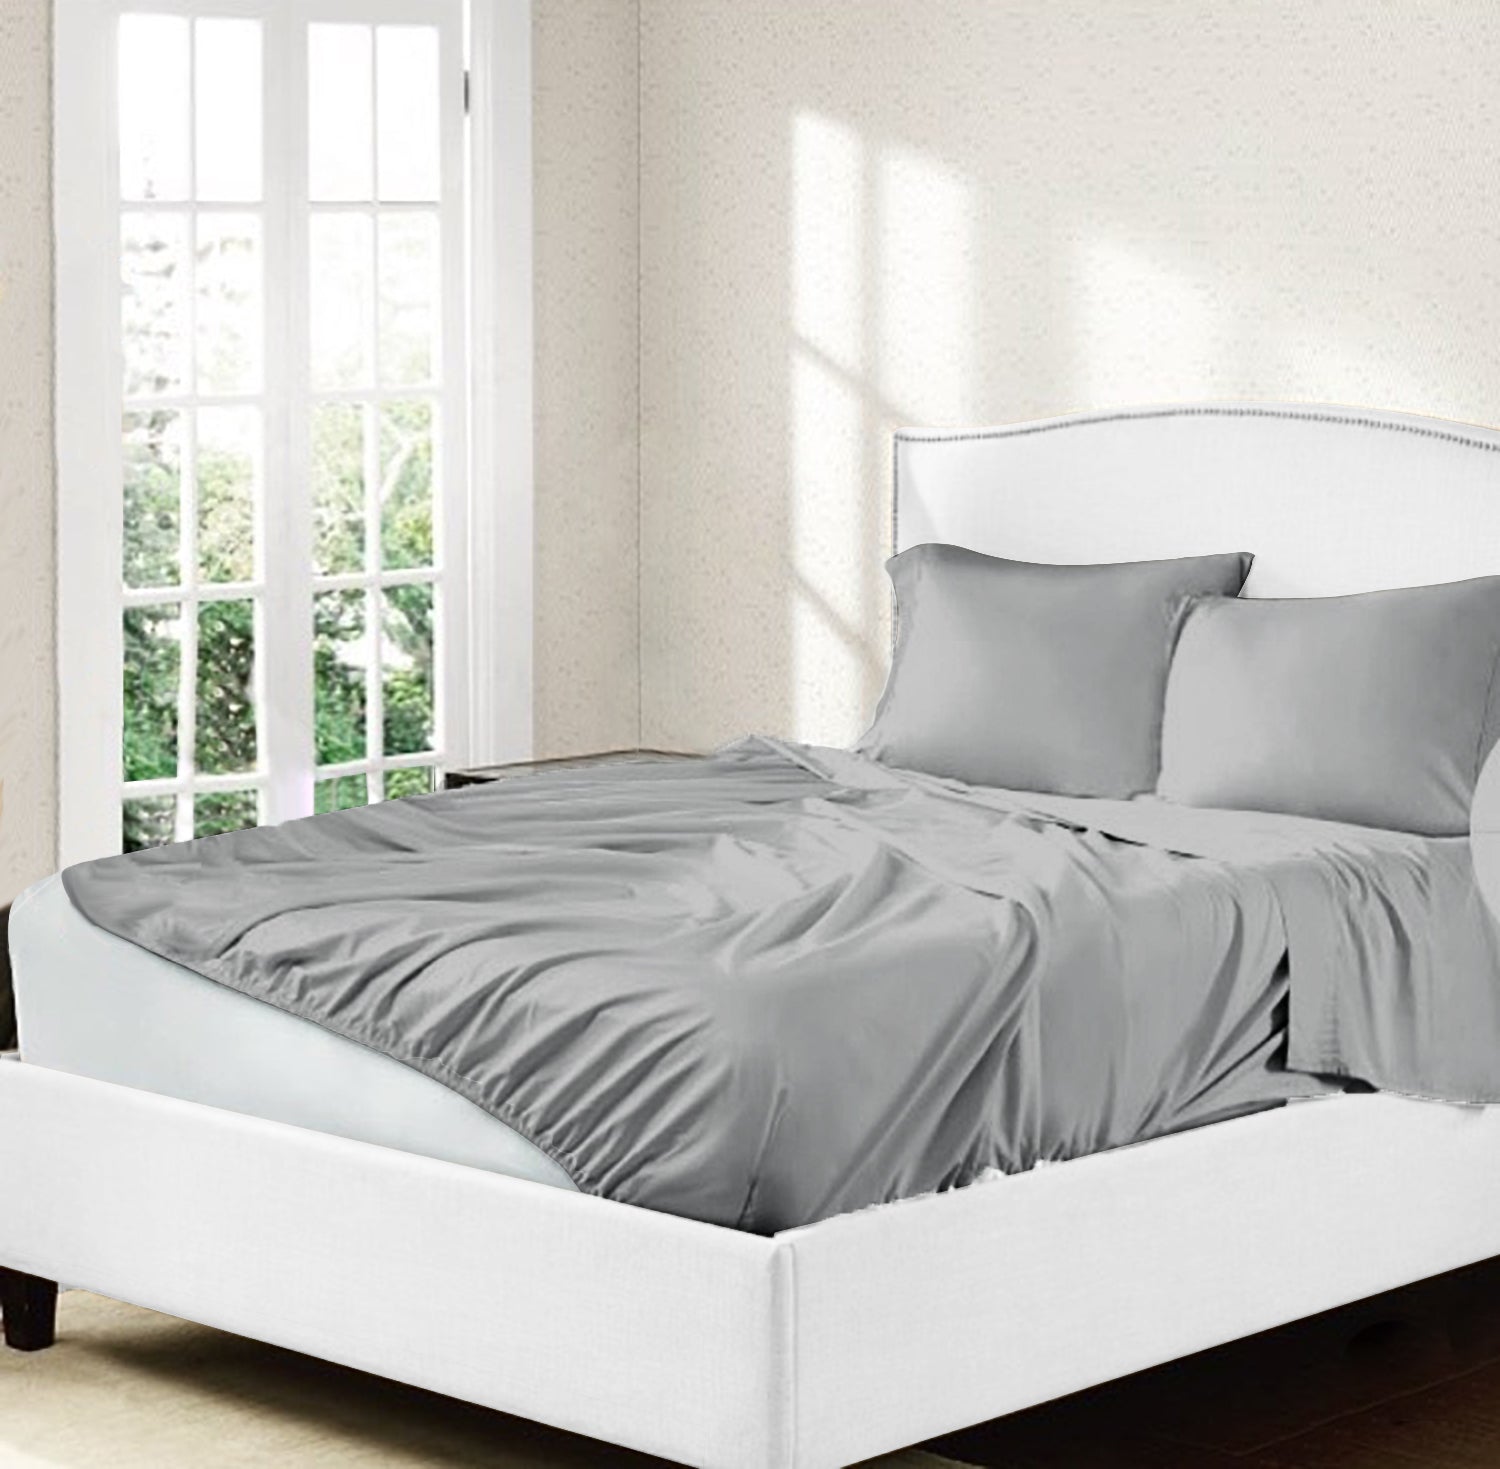 unmade bed, patented design, patented top sheet, bedding, bedding set